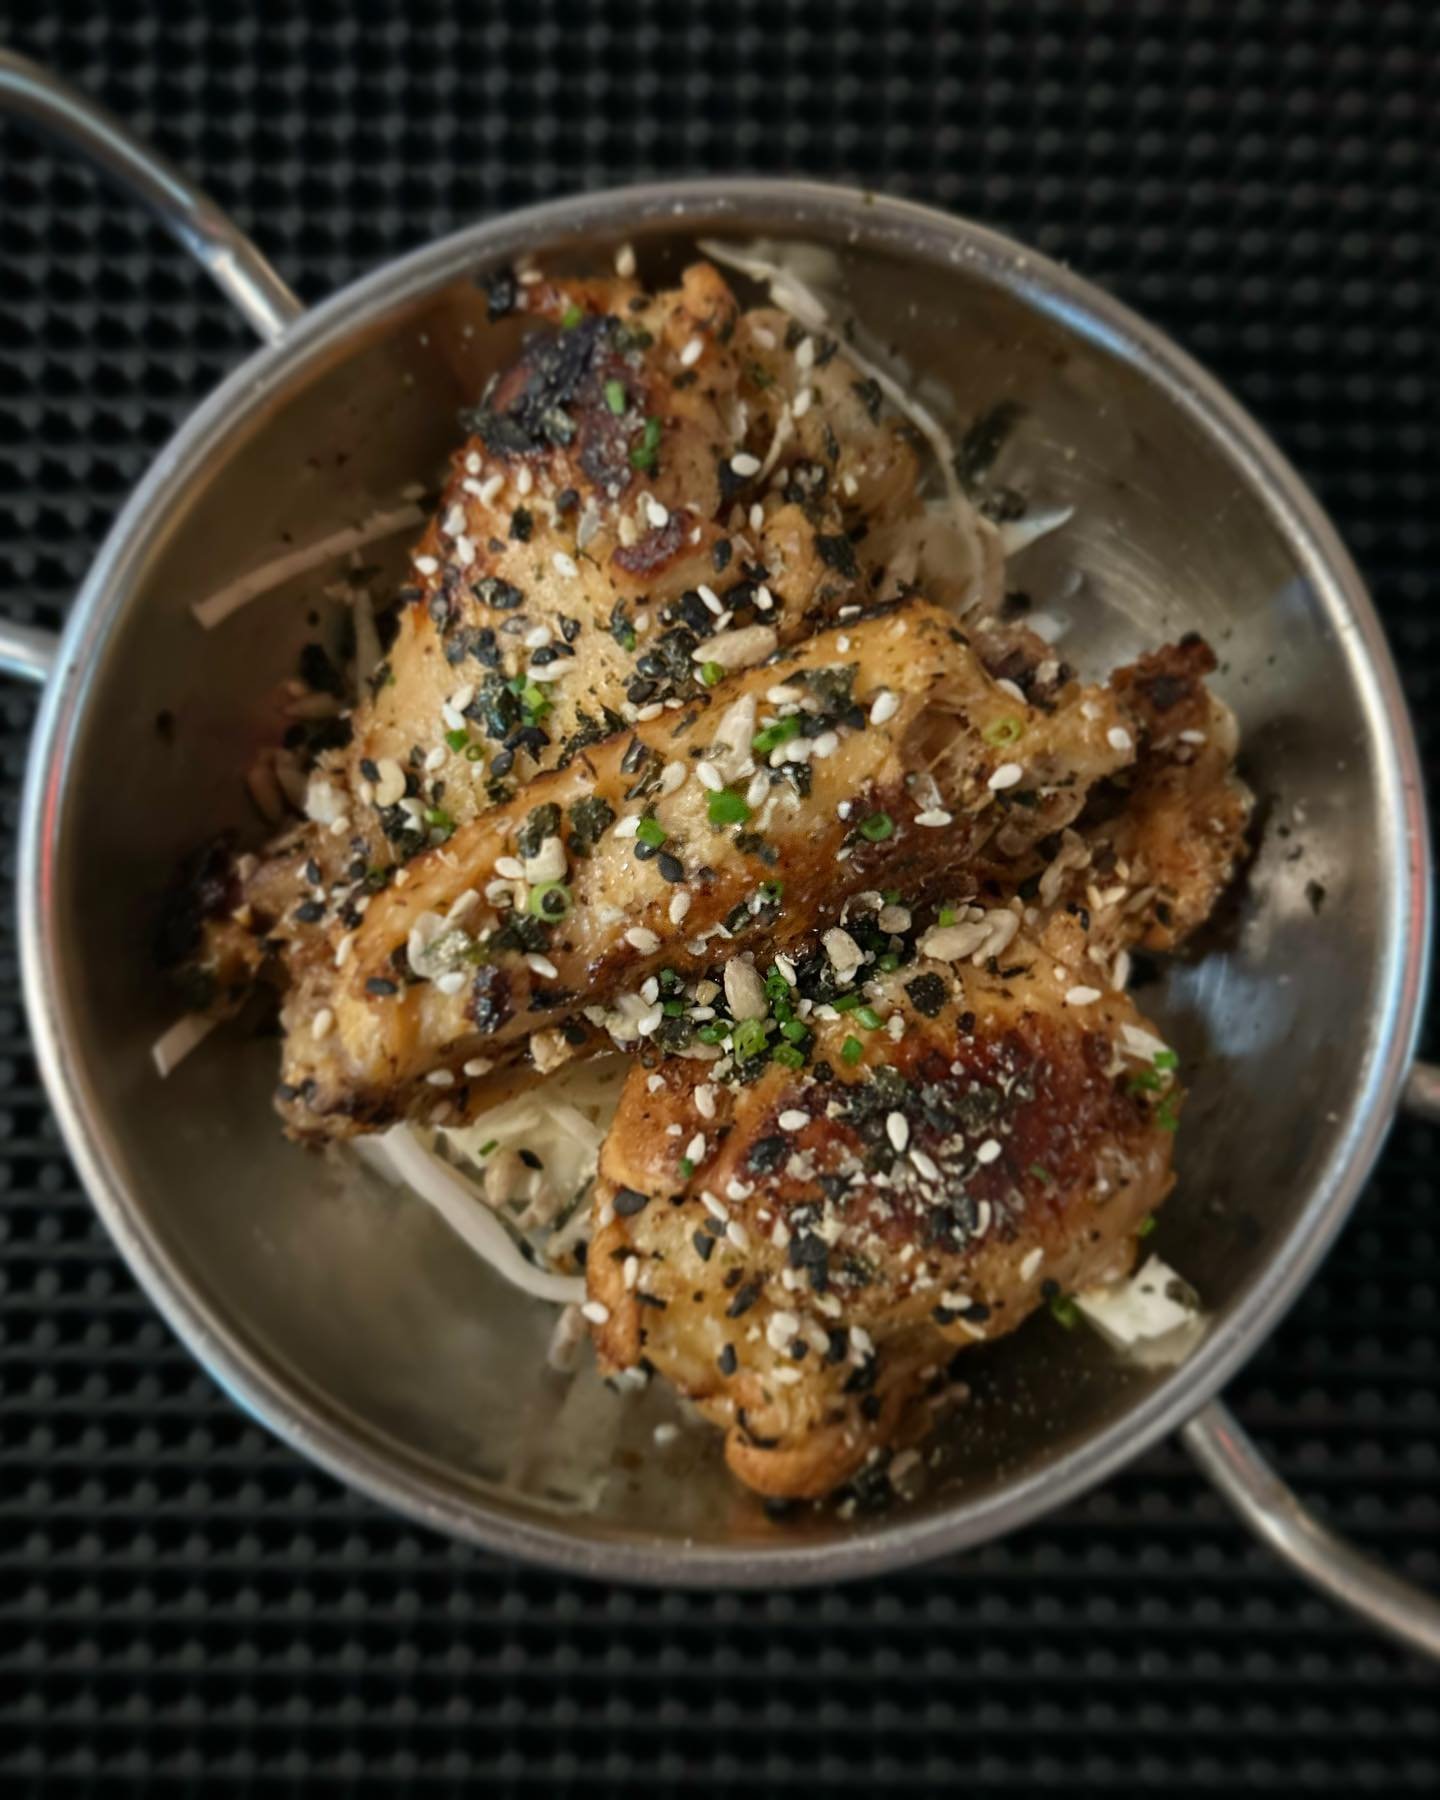 Yaki &amp; Sak&eacute; might be postponed but we brought the 🔥 inside!!
🍯 Korean miso &amp; honey glazed pork RIBS coated in puffed rice noodles 
🍗 lemon, soy, yuzu chicken WING
Both go great with our sak&eacute; selection. Come join us!